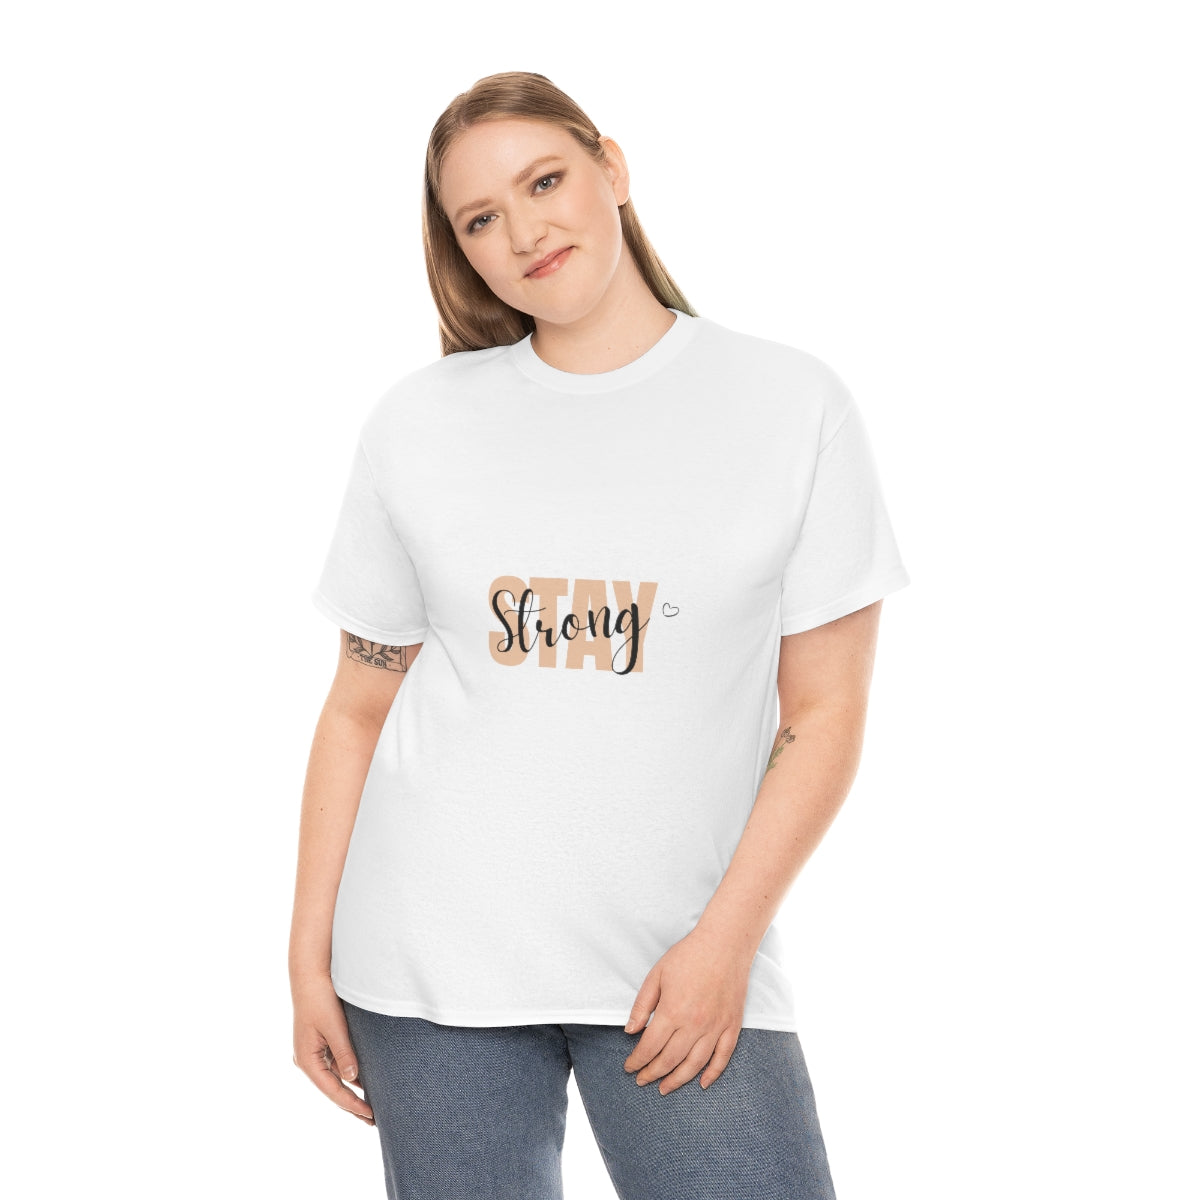 Stay Strong T-Shirt Survivor Tee Motivational Shirt Affirmation Tshirt Faith T Christian Apparel Warrior Wear Gift for Her - The Good Life Vibe